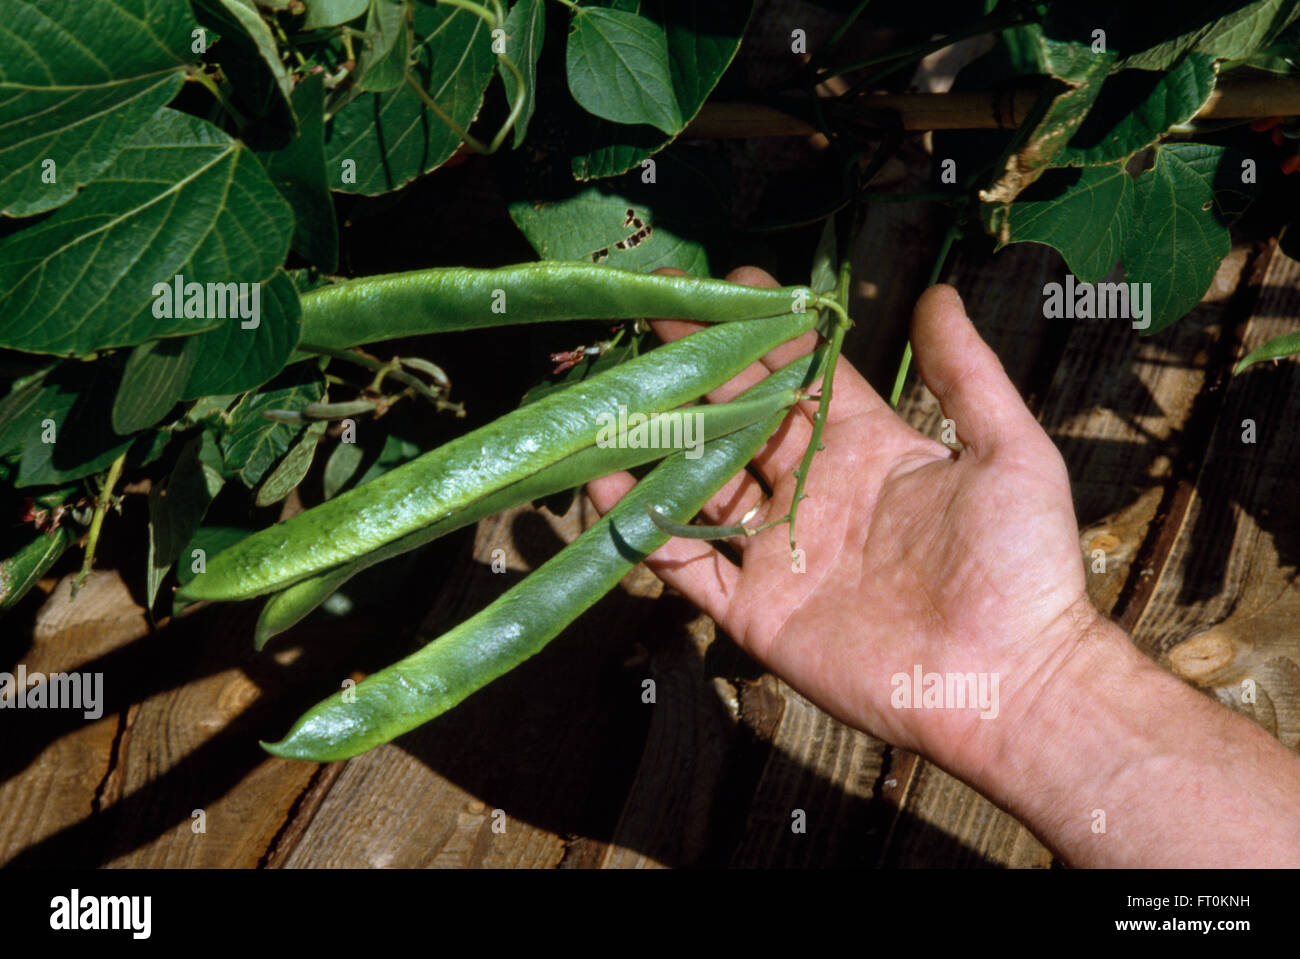 Close-up of hand holding a plant of runner beans Stock Photo